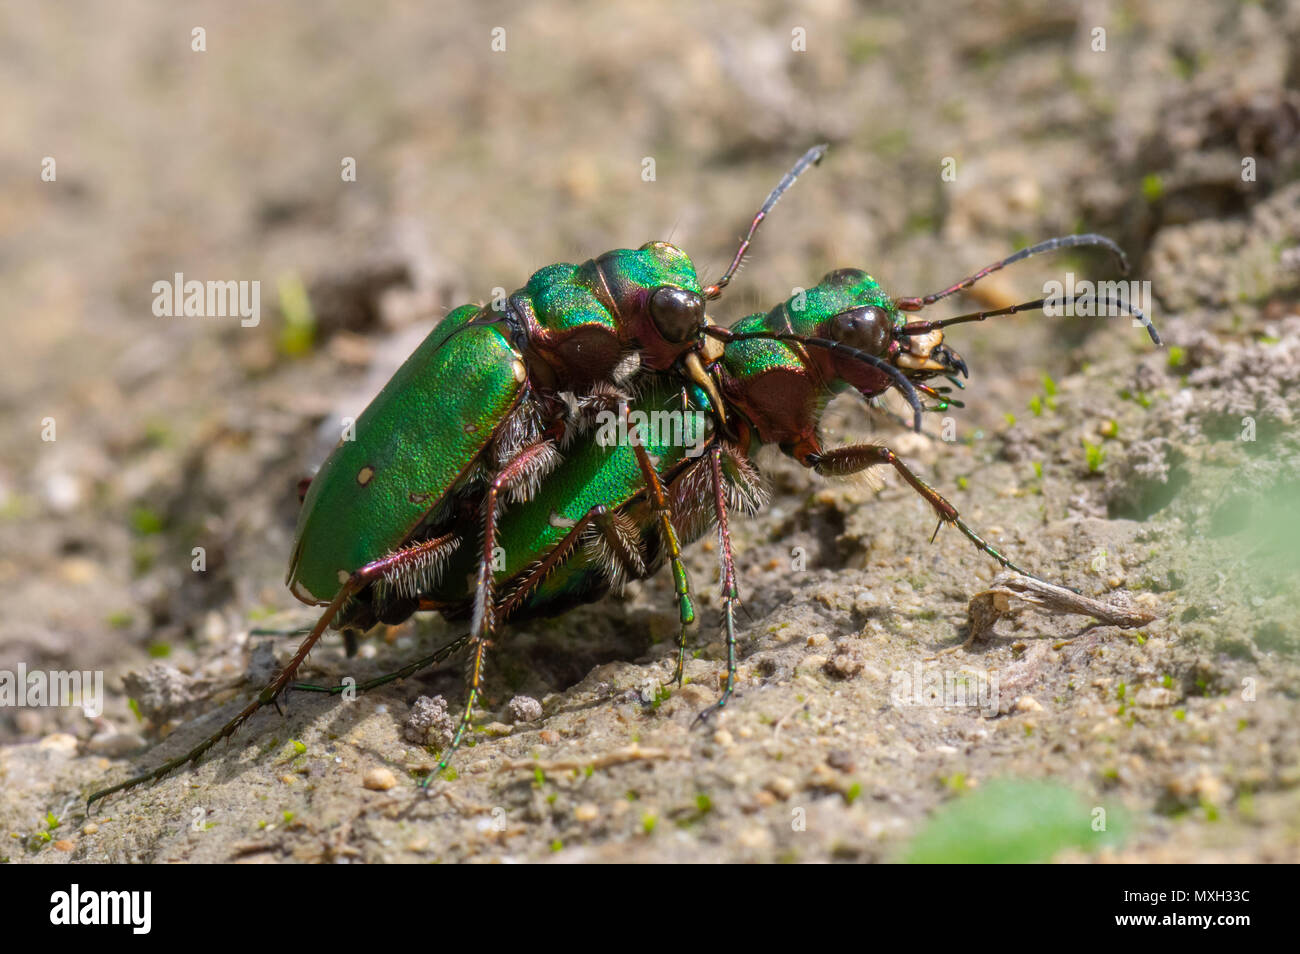 Green tiger beetles (Cicindela campestris) mating. Insects in the family Carabidae in cop, showing metallic colouring and impressive mandibles Stock Photo